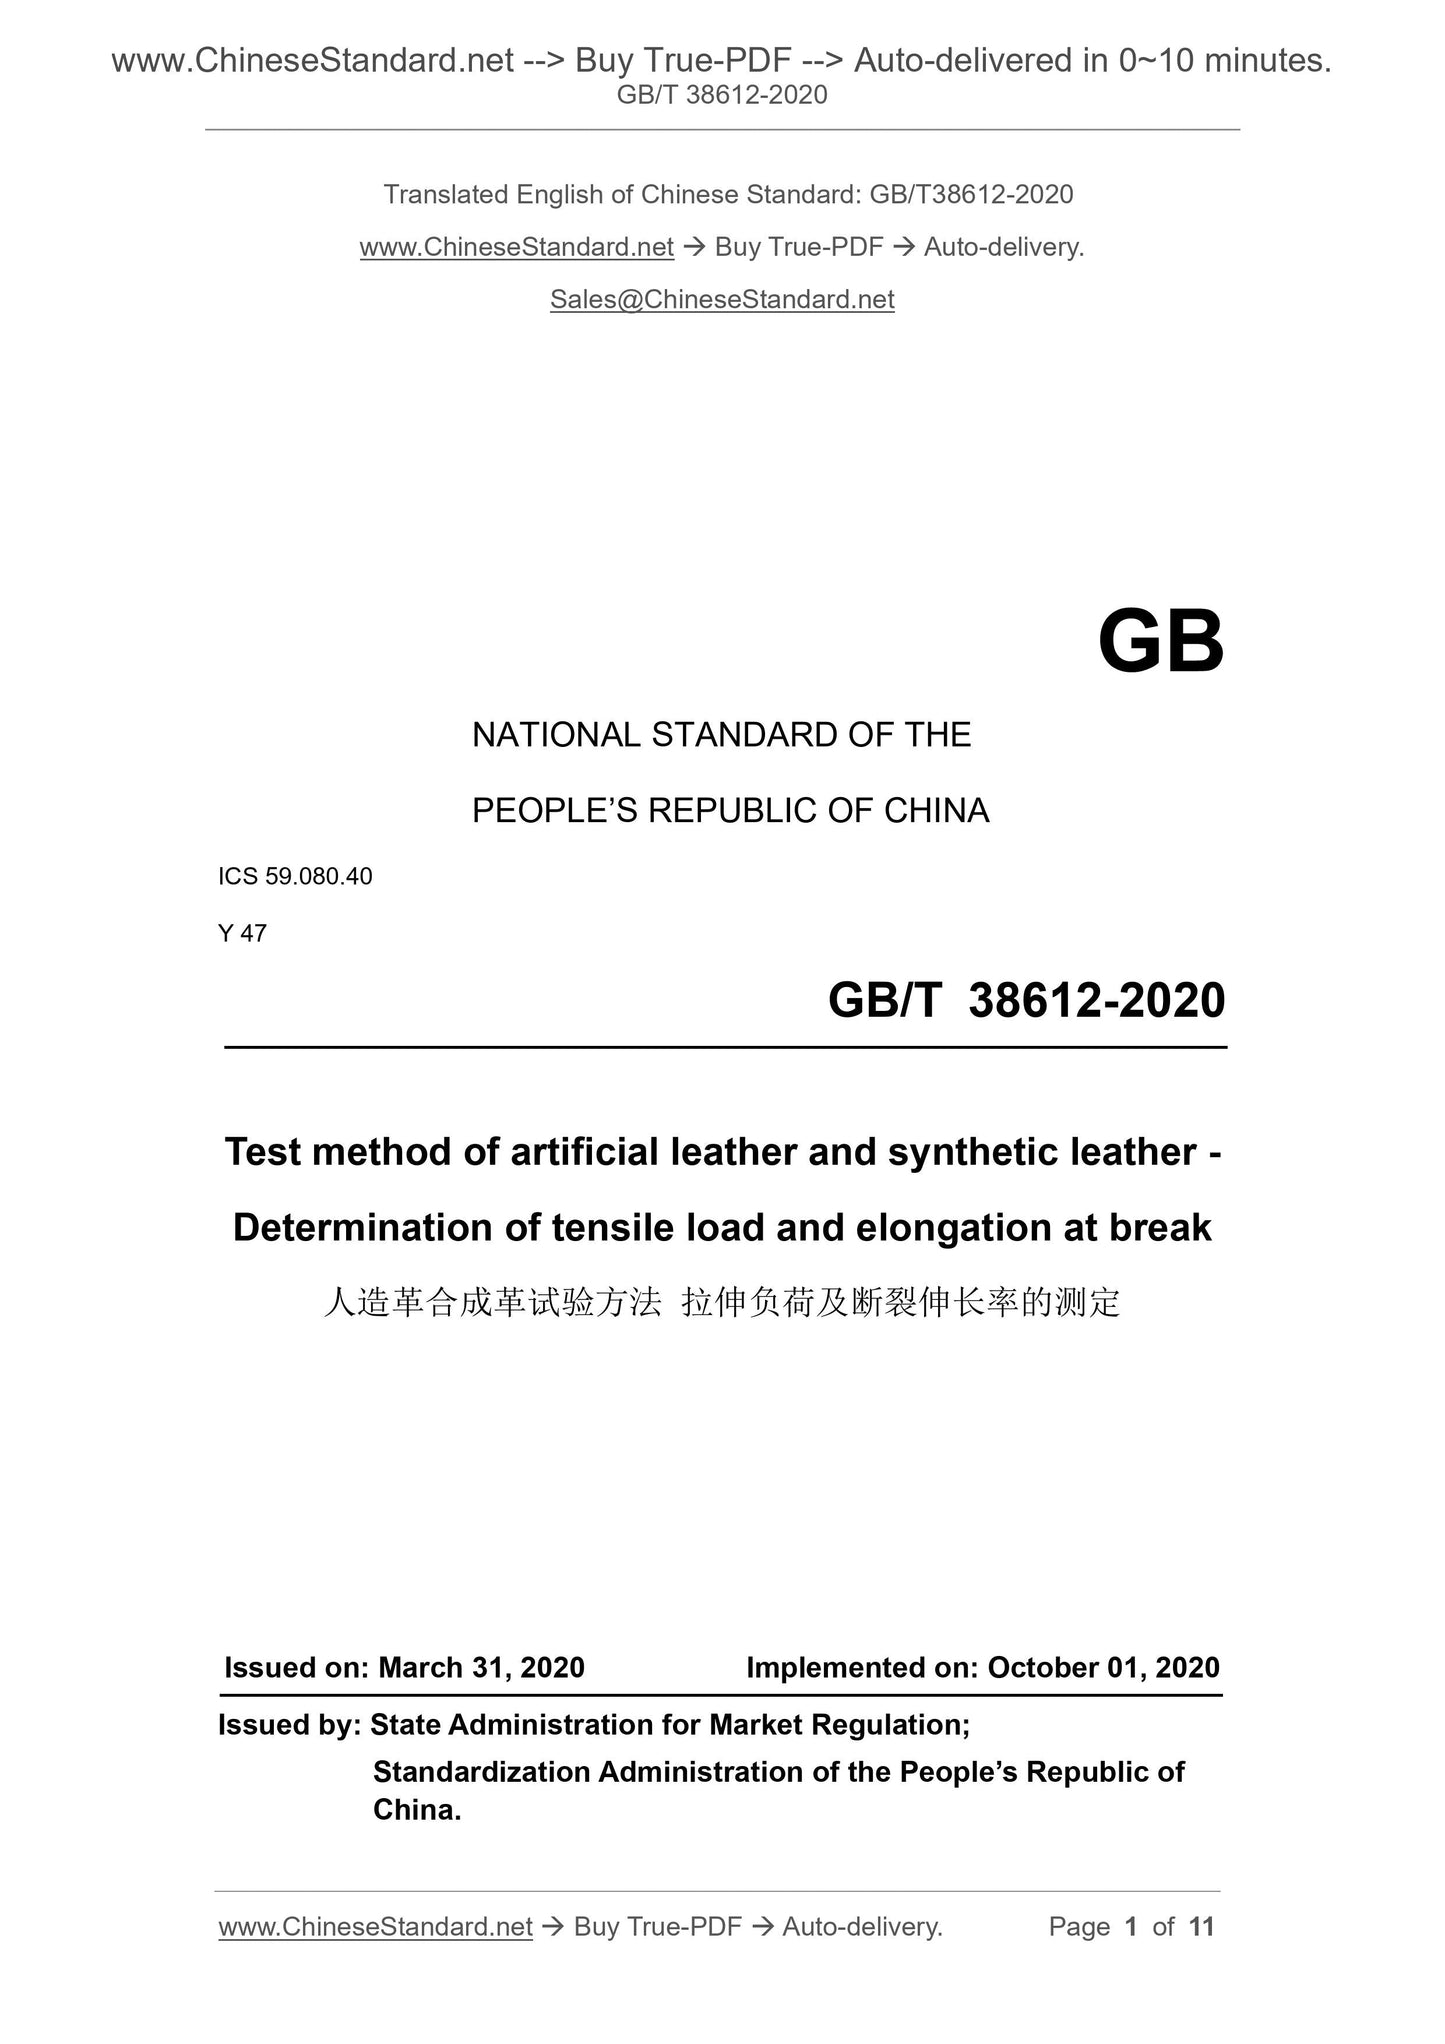 GB/T 38612-2020 Page 1